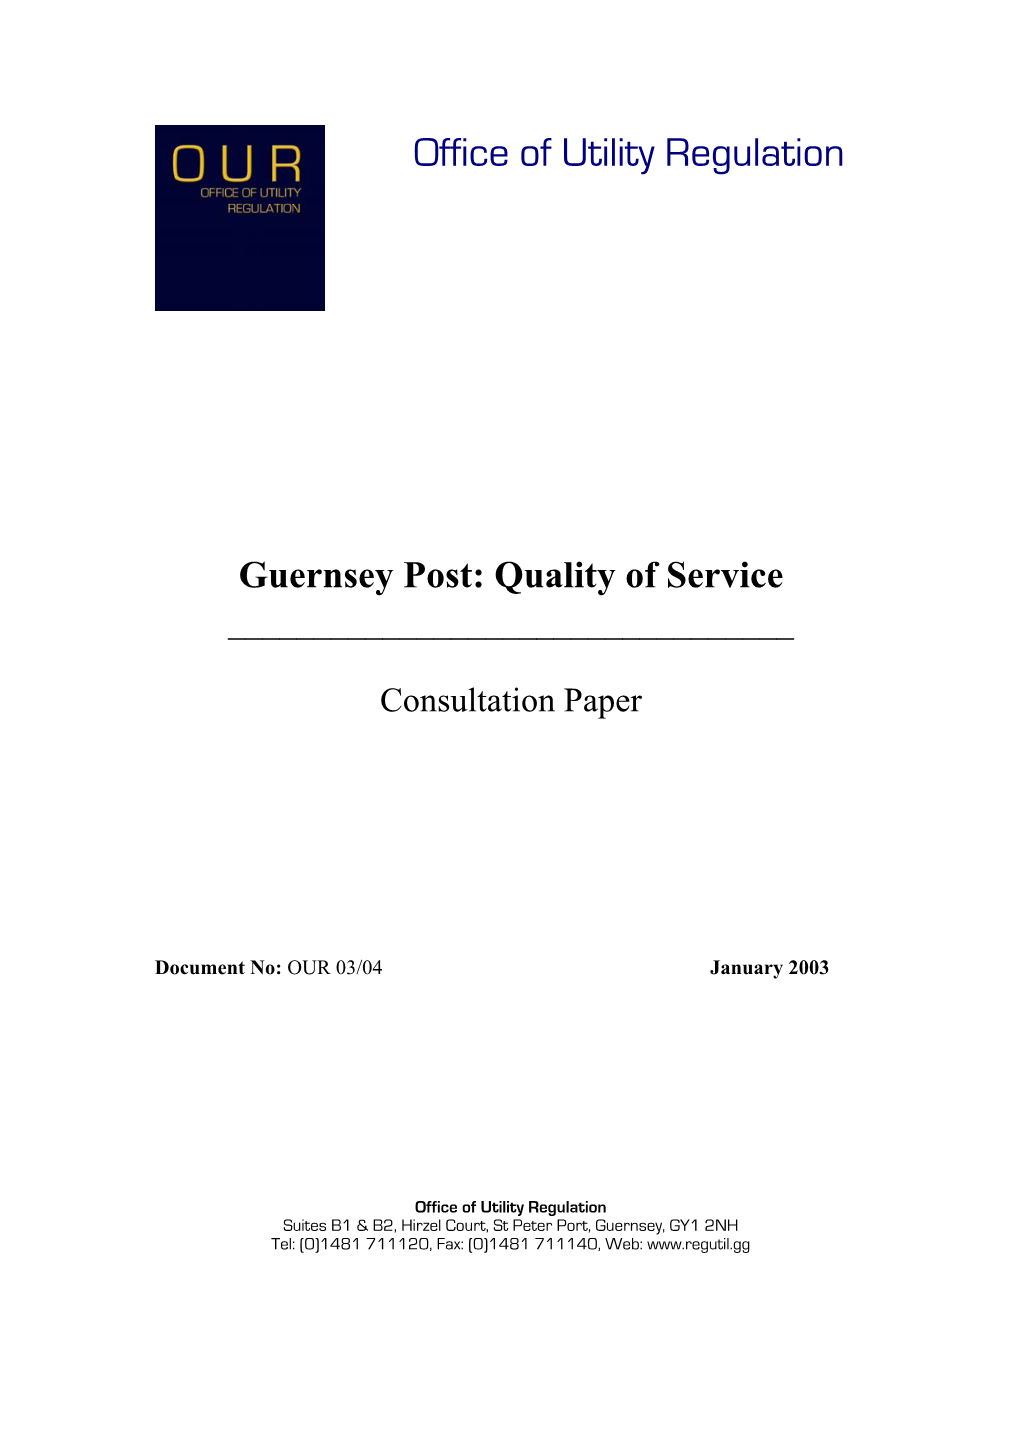 Guernsey Post: Quality of Services. Consultation Paper